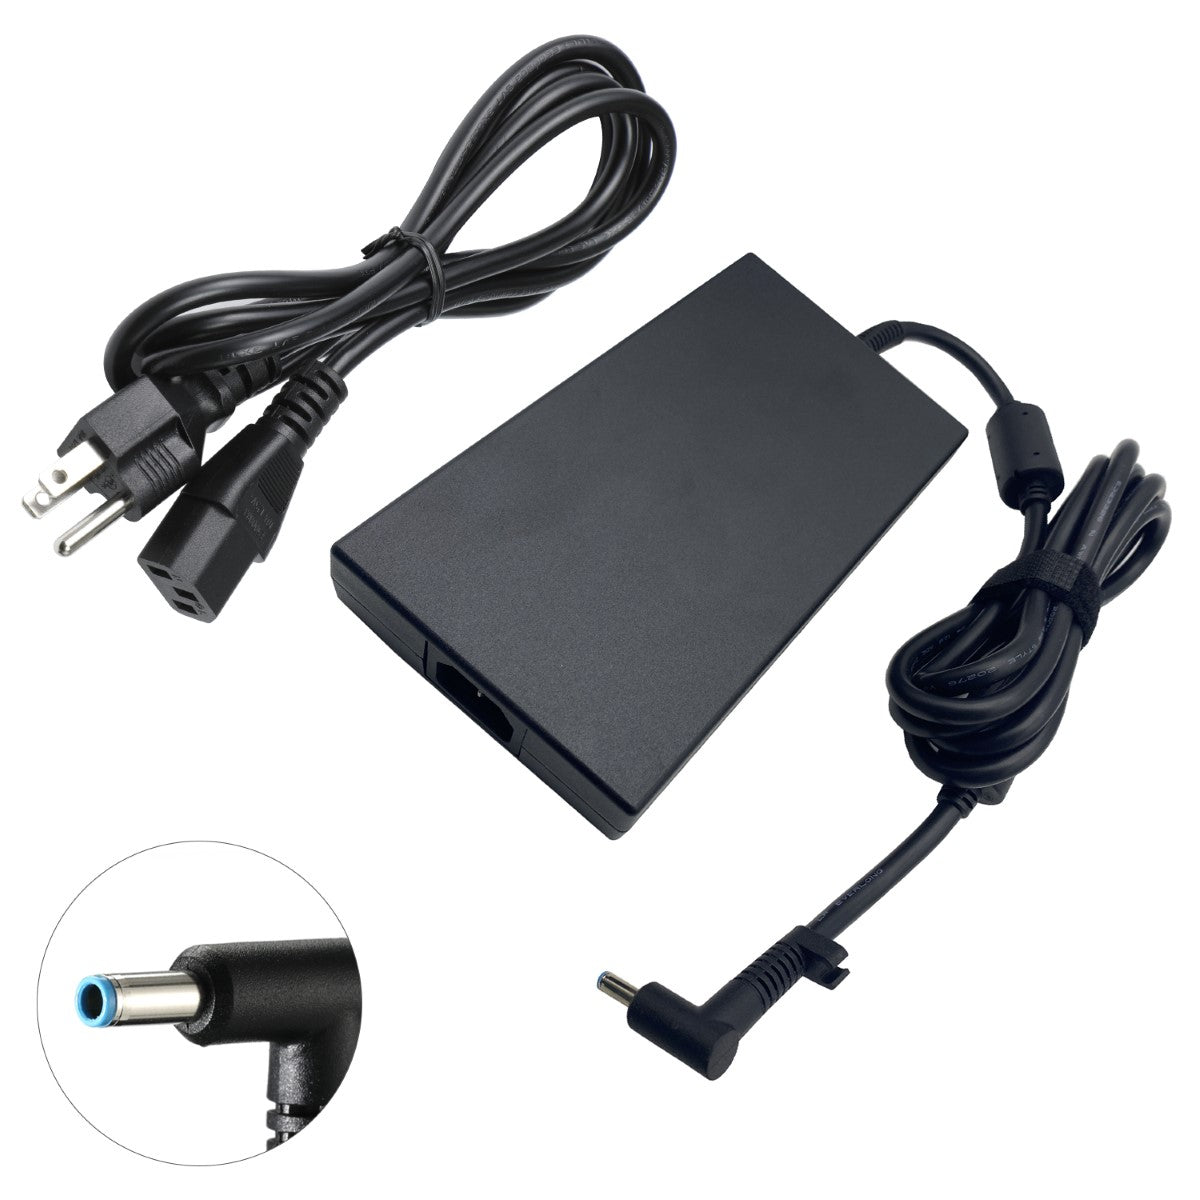 AC Adapter for HP Victus 16-e0011wm Laptop